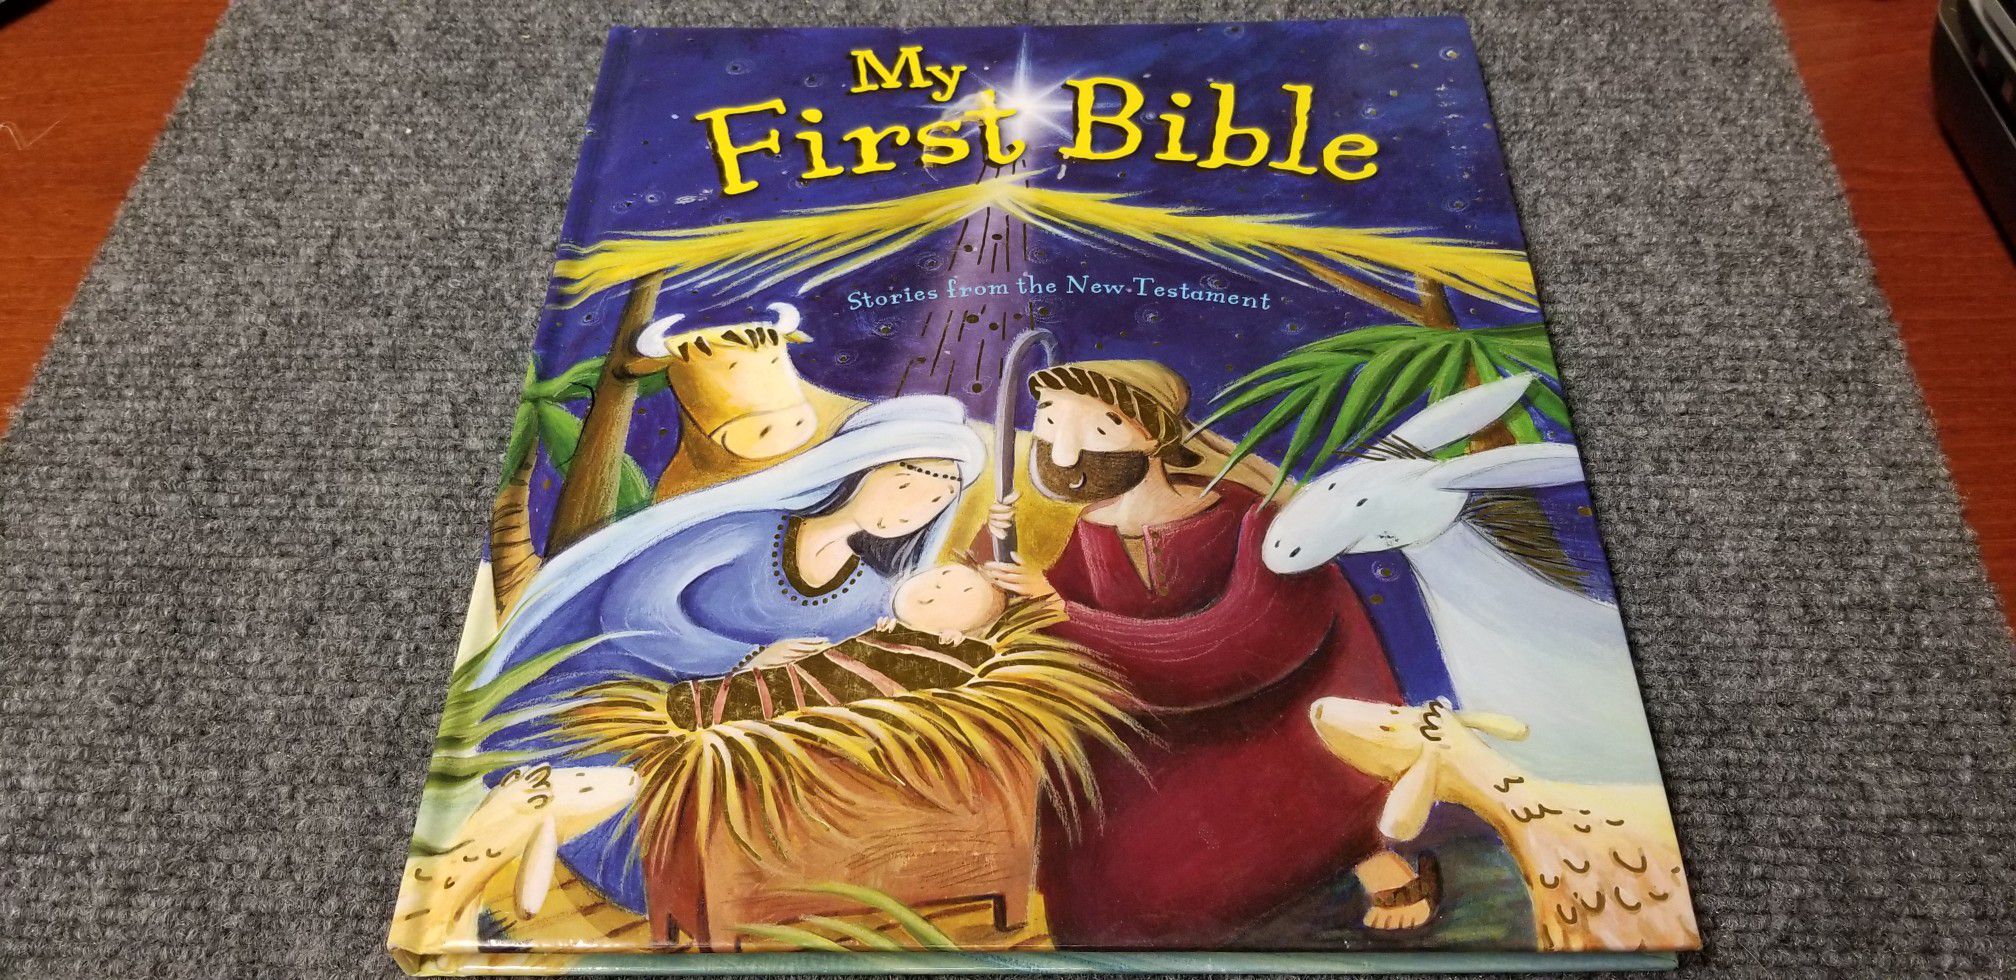 My First Bible - Stories from the new testament